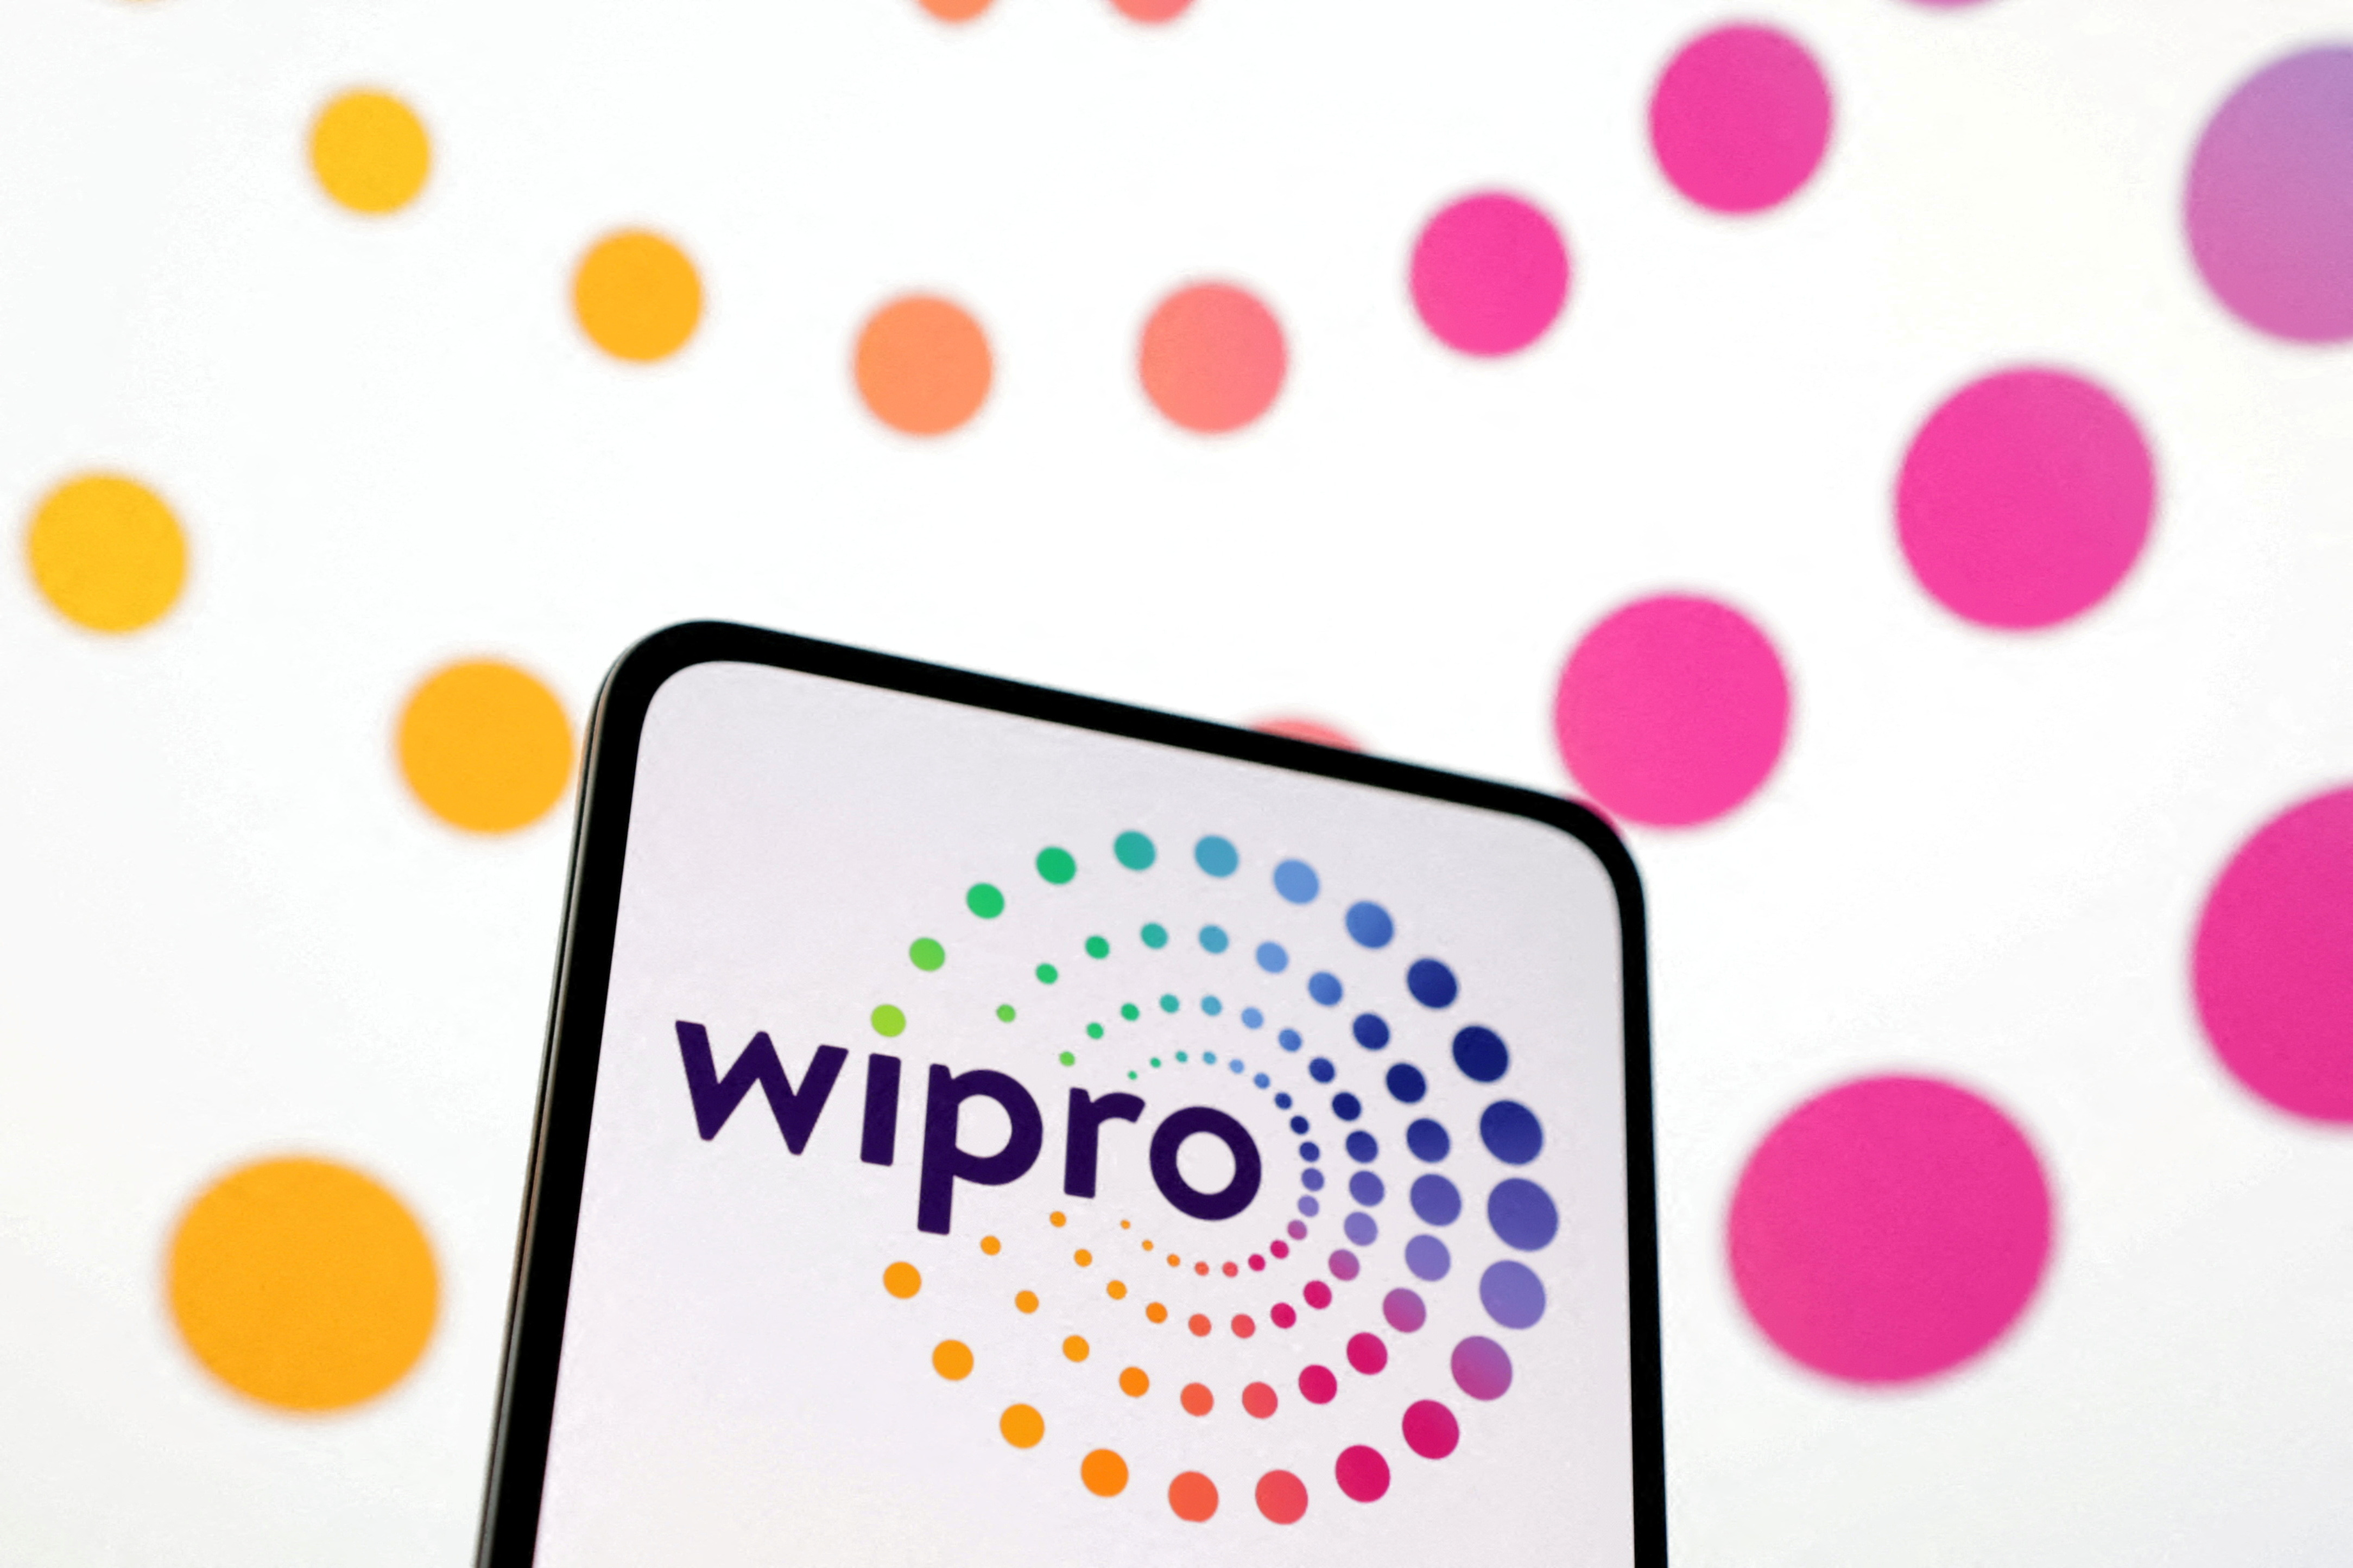 India's Wipro slides after CFO Dalal resigns in latest highprofile